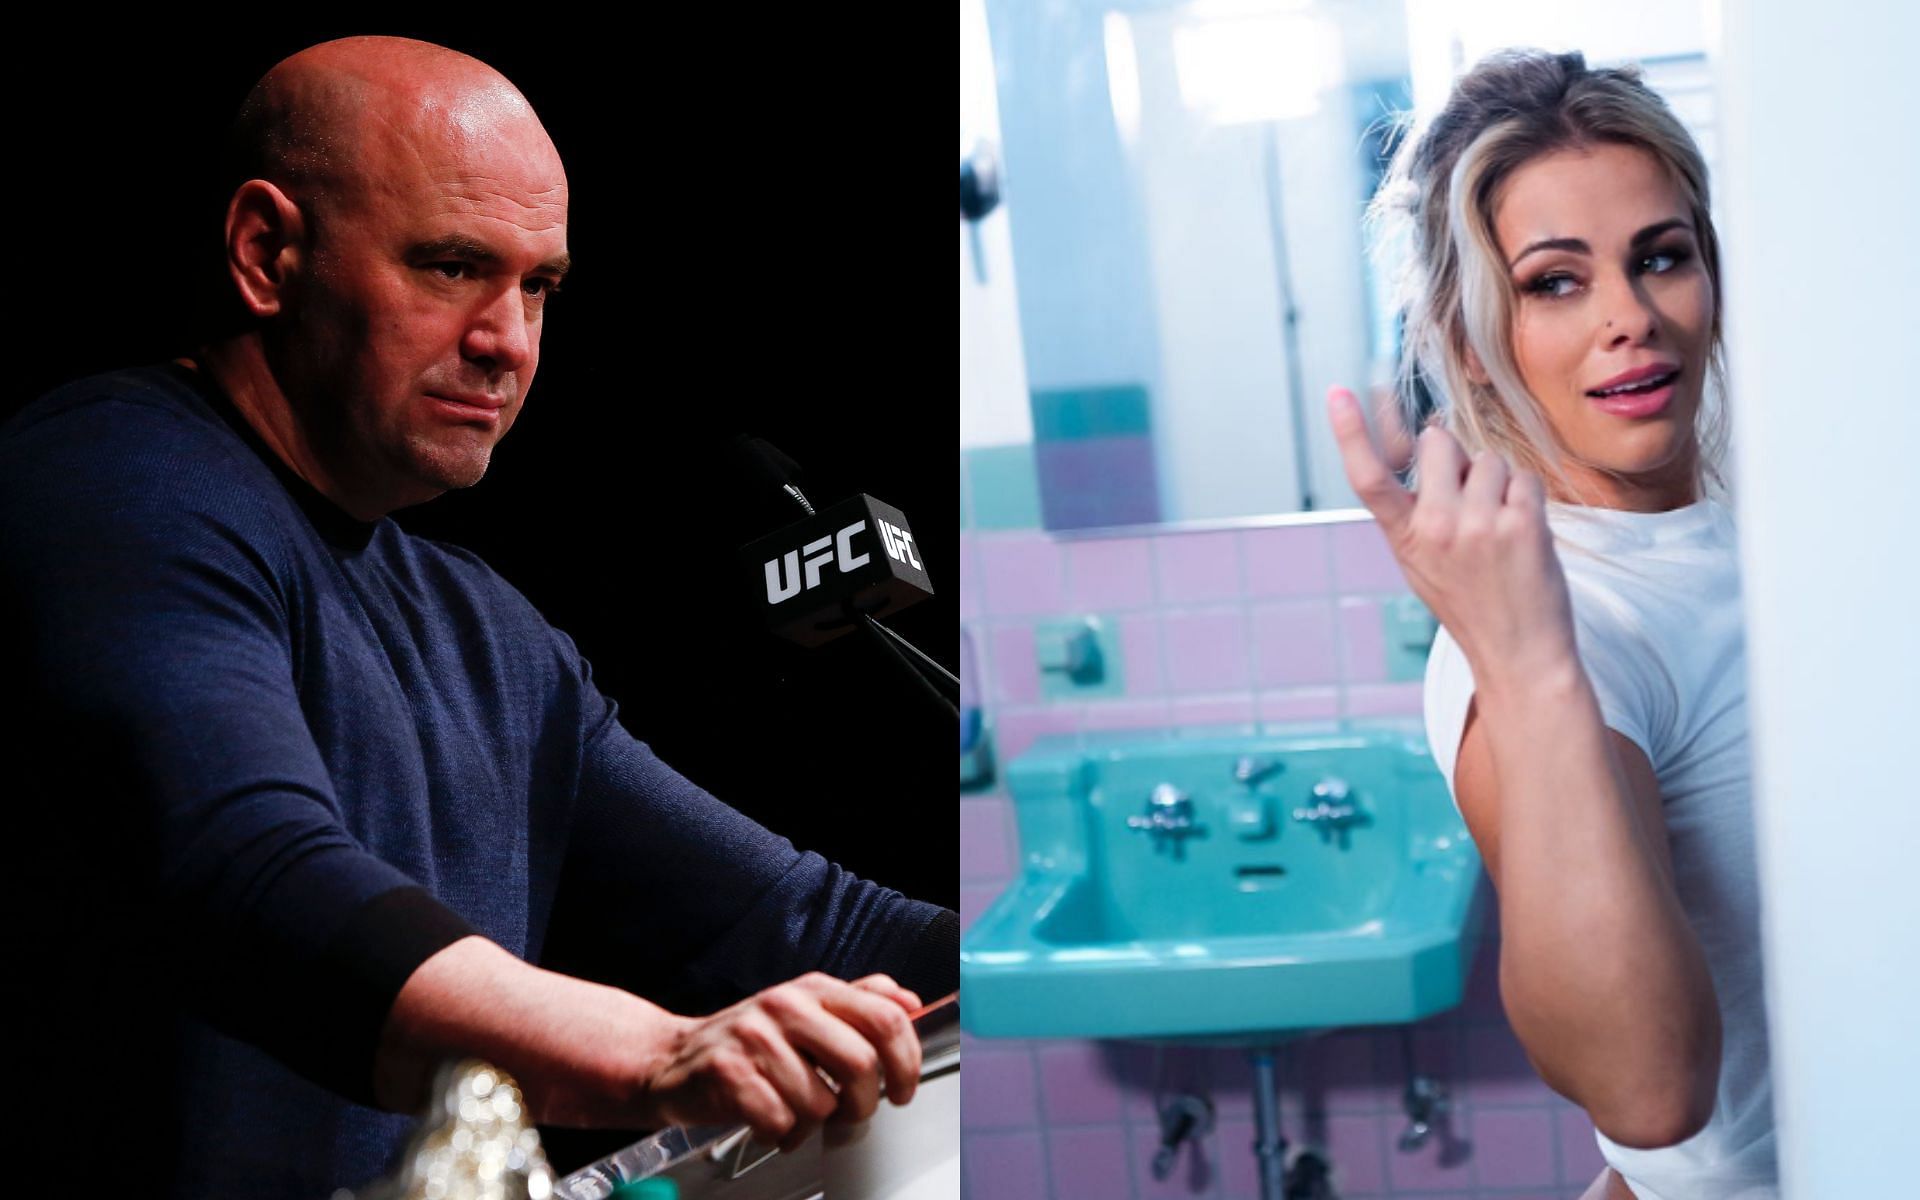 Dana White (left), Paige VanZant (right) [Image credits: Getty Images and @paigevanzant]